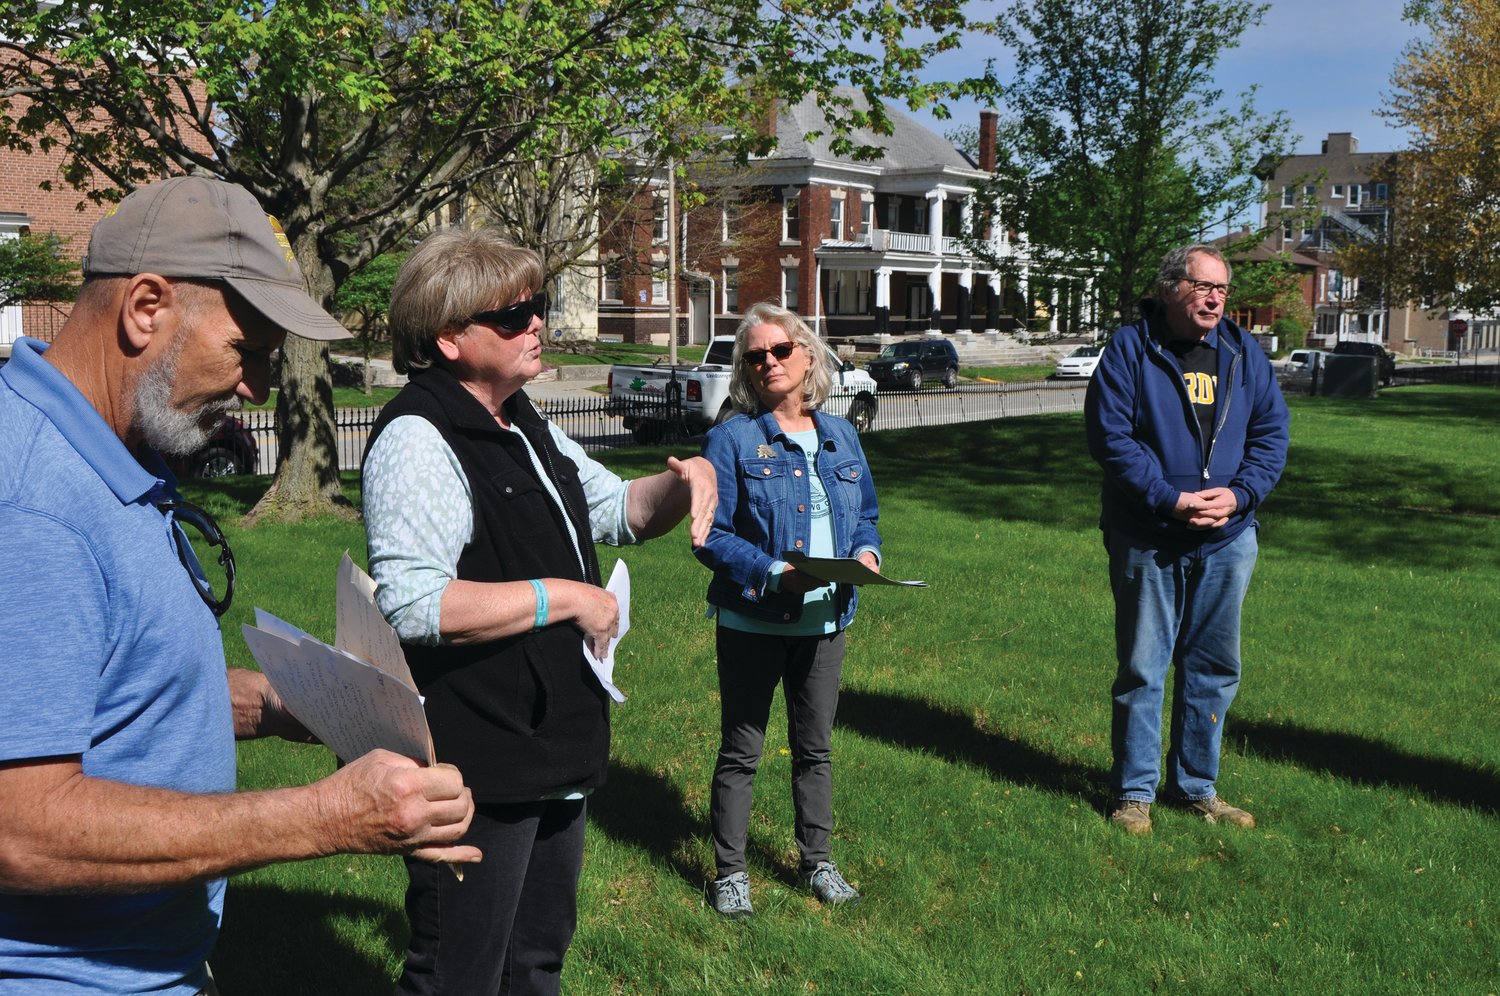 Sue Lucas, program manager of Crawfordsville Main Street, speaks during an Arbor Day tree planting ceremony as Mark Davidson, Belinda Kiger and Jeff Bickel look on at the Lane Place Friday. Main Street planted a tree in memory of Bickel